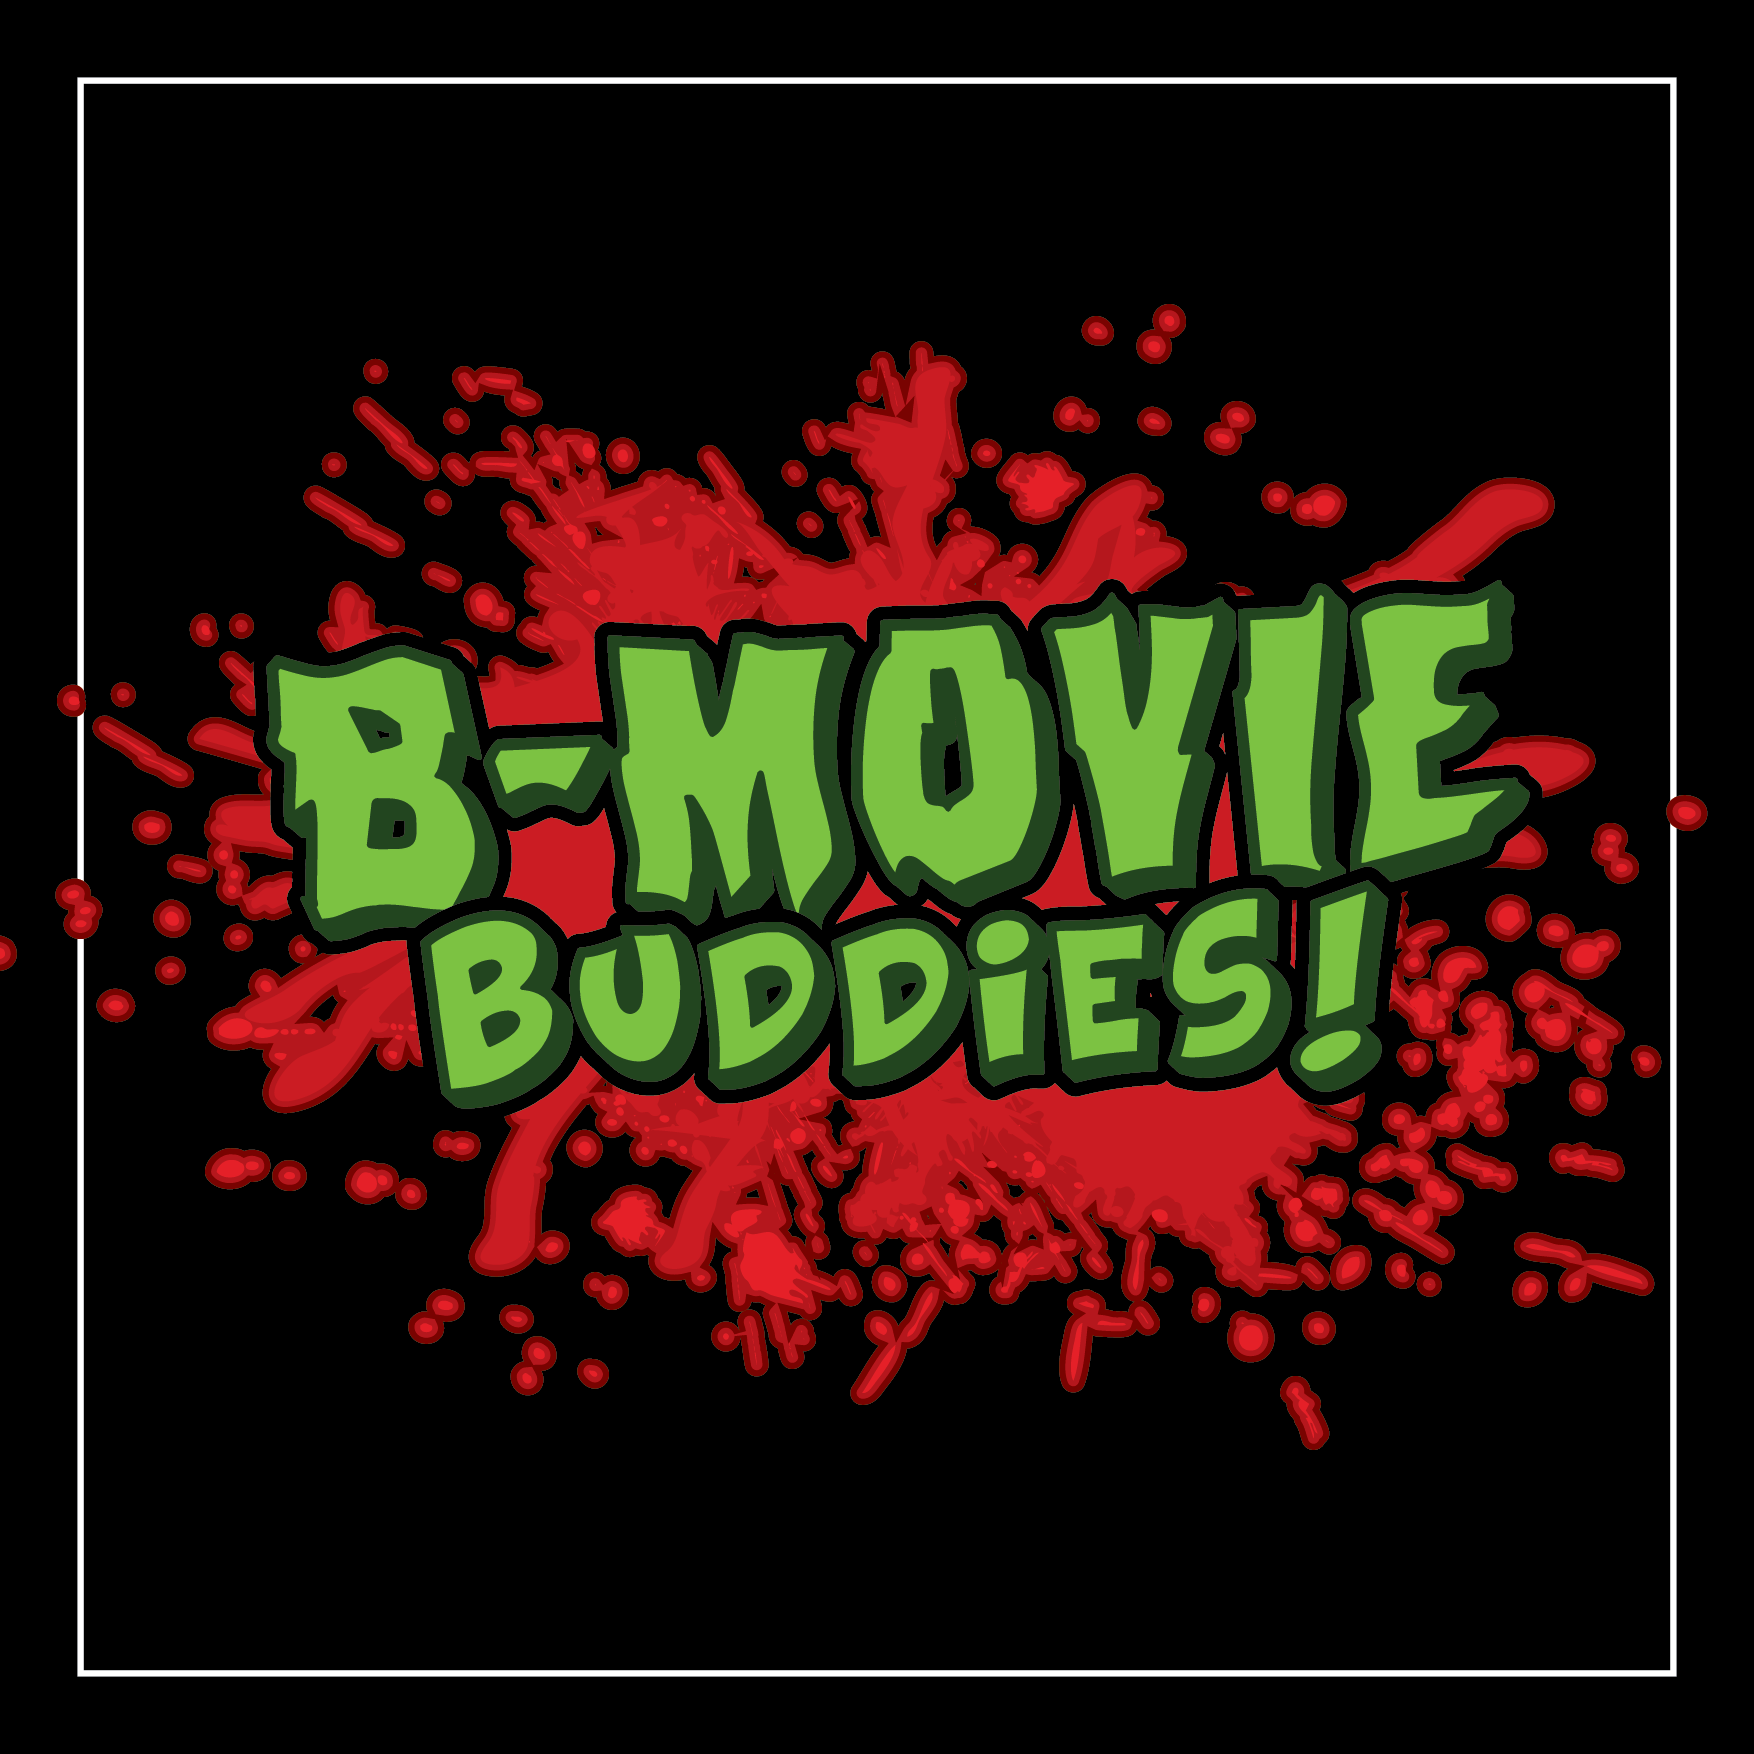 2 Dudes from Melbourne talk mess about B-Movies and make eachother laugh in the process. Have a listen!